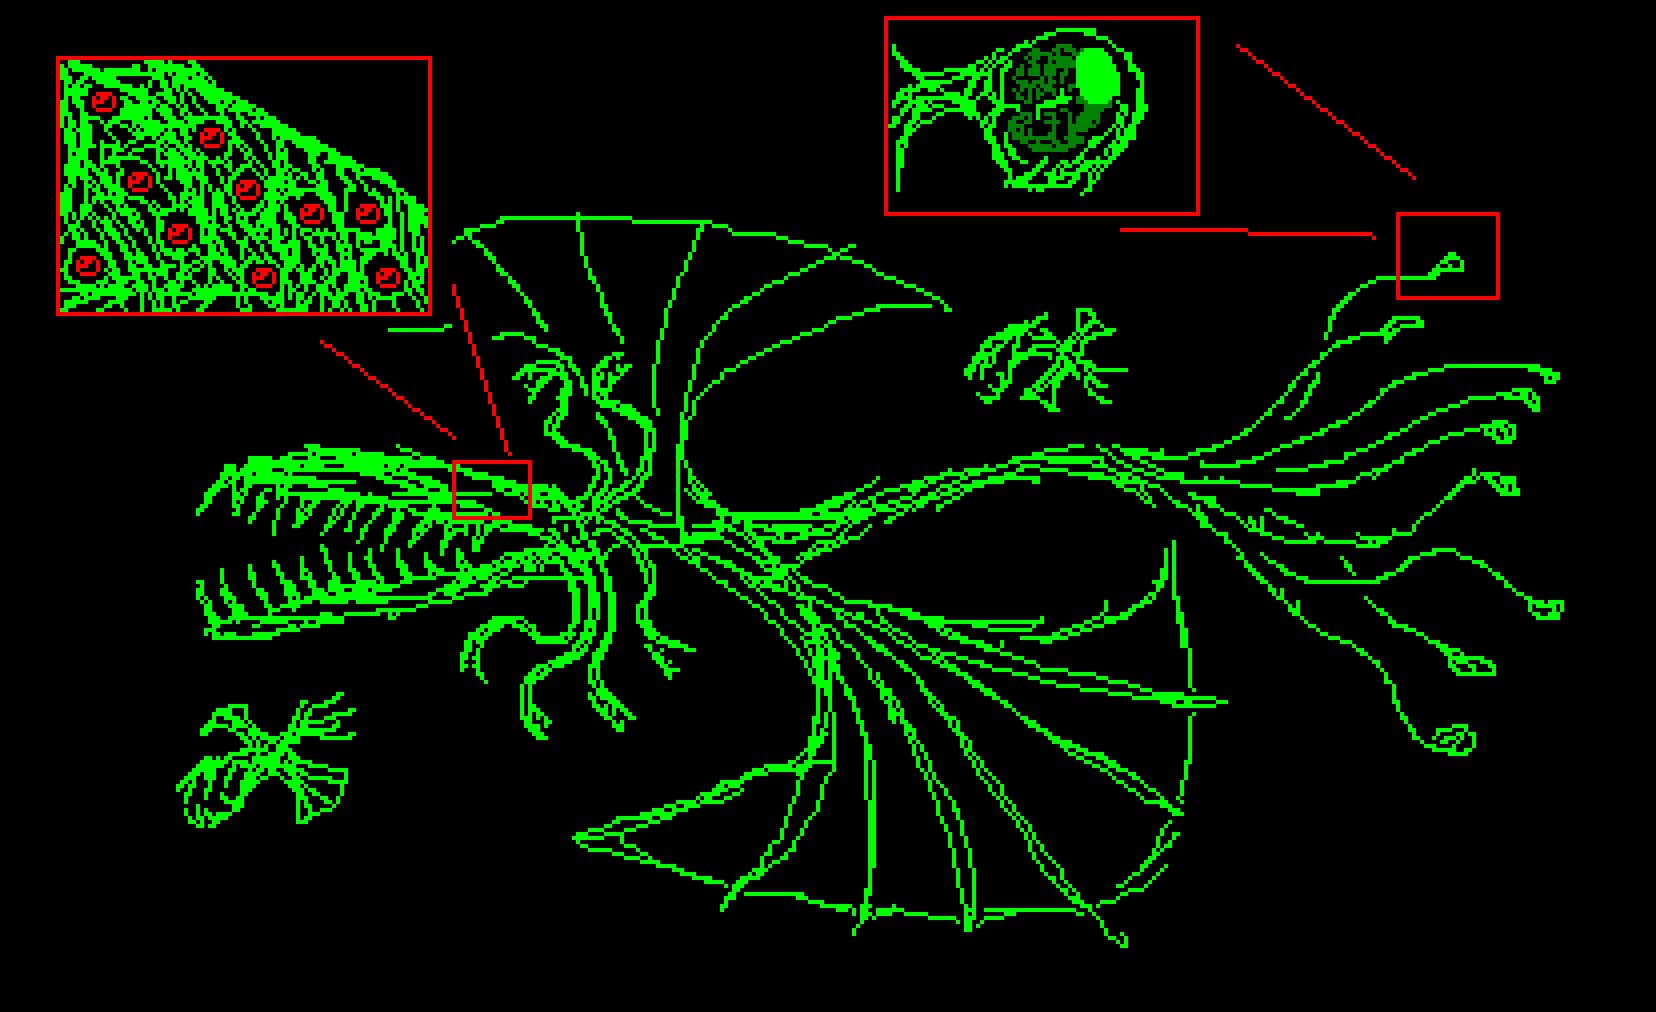 A sketch of the previously mentioned space form of the Witchlight Marauder, a gigantic being with a crocodilian head ringed by a set of tentacles with smaller tentacles on them. The head is covered in tiny red eyes. On each side of its body is a massive sail-like crescent shaped wing. At its rear is a 'tail' that terminates in a variety of tentacles, some of them growing the seeds that will become Primary Marauders upon being released upon a planet. Others grow 'Remote Feeders', smaller versions of the main body that assist it in obtaining nutrition and can be seen flying alongside it.